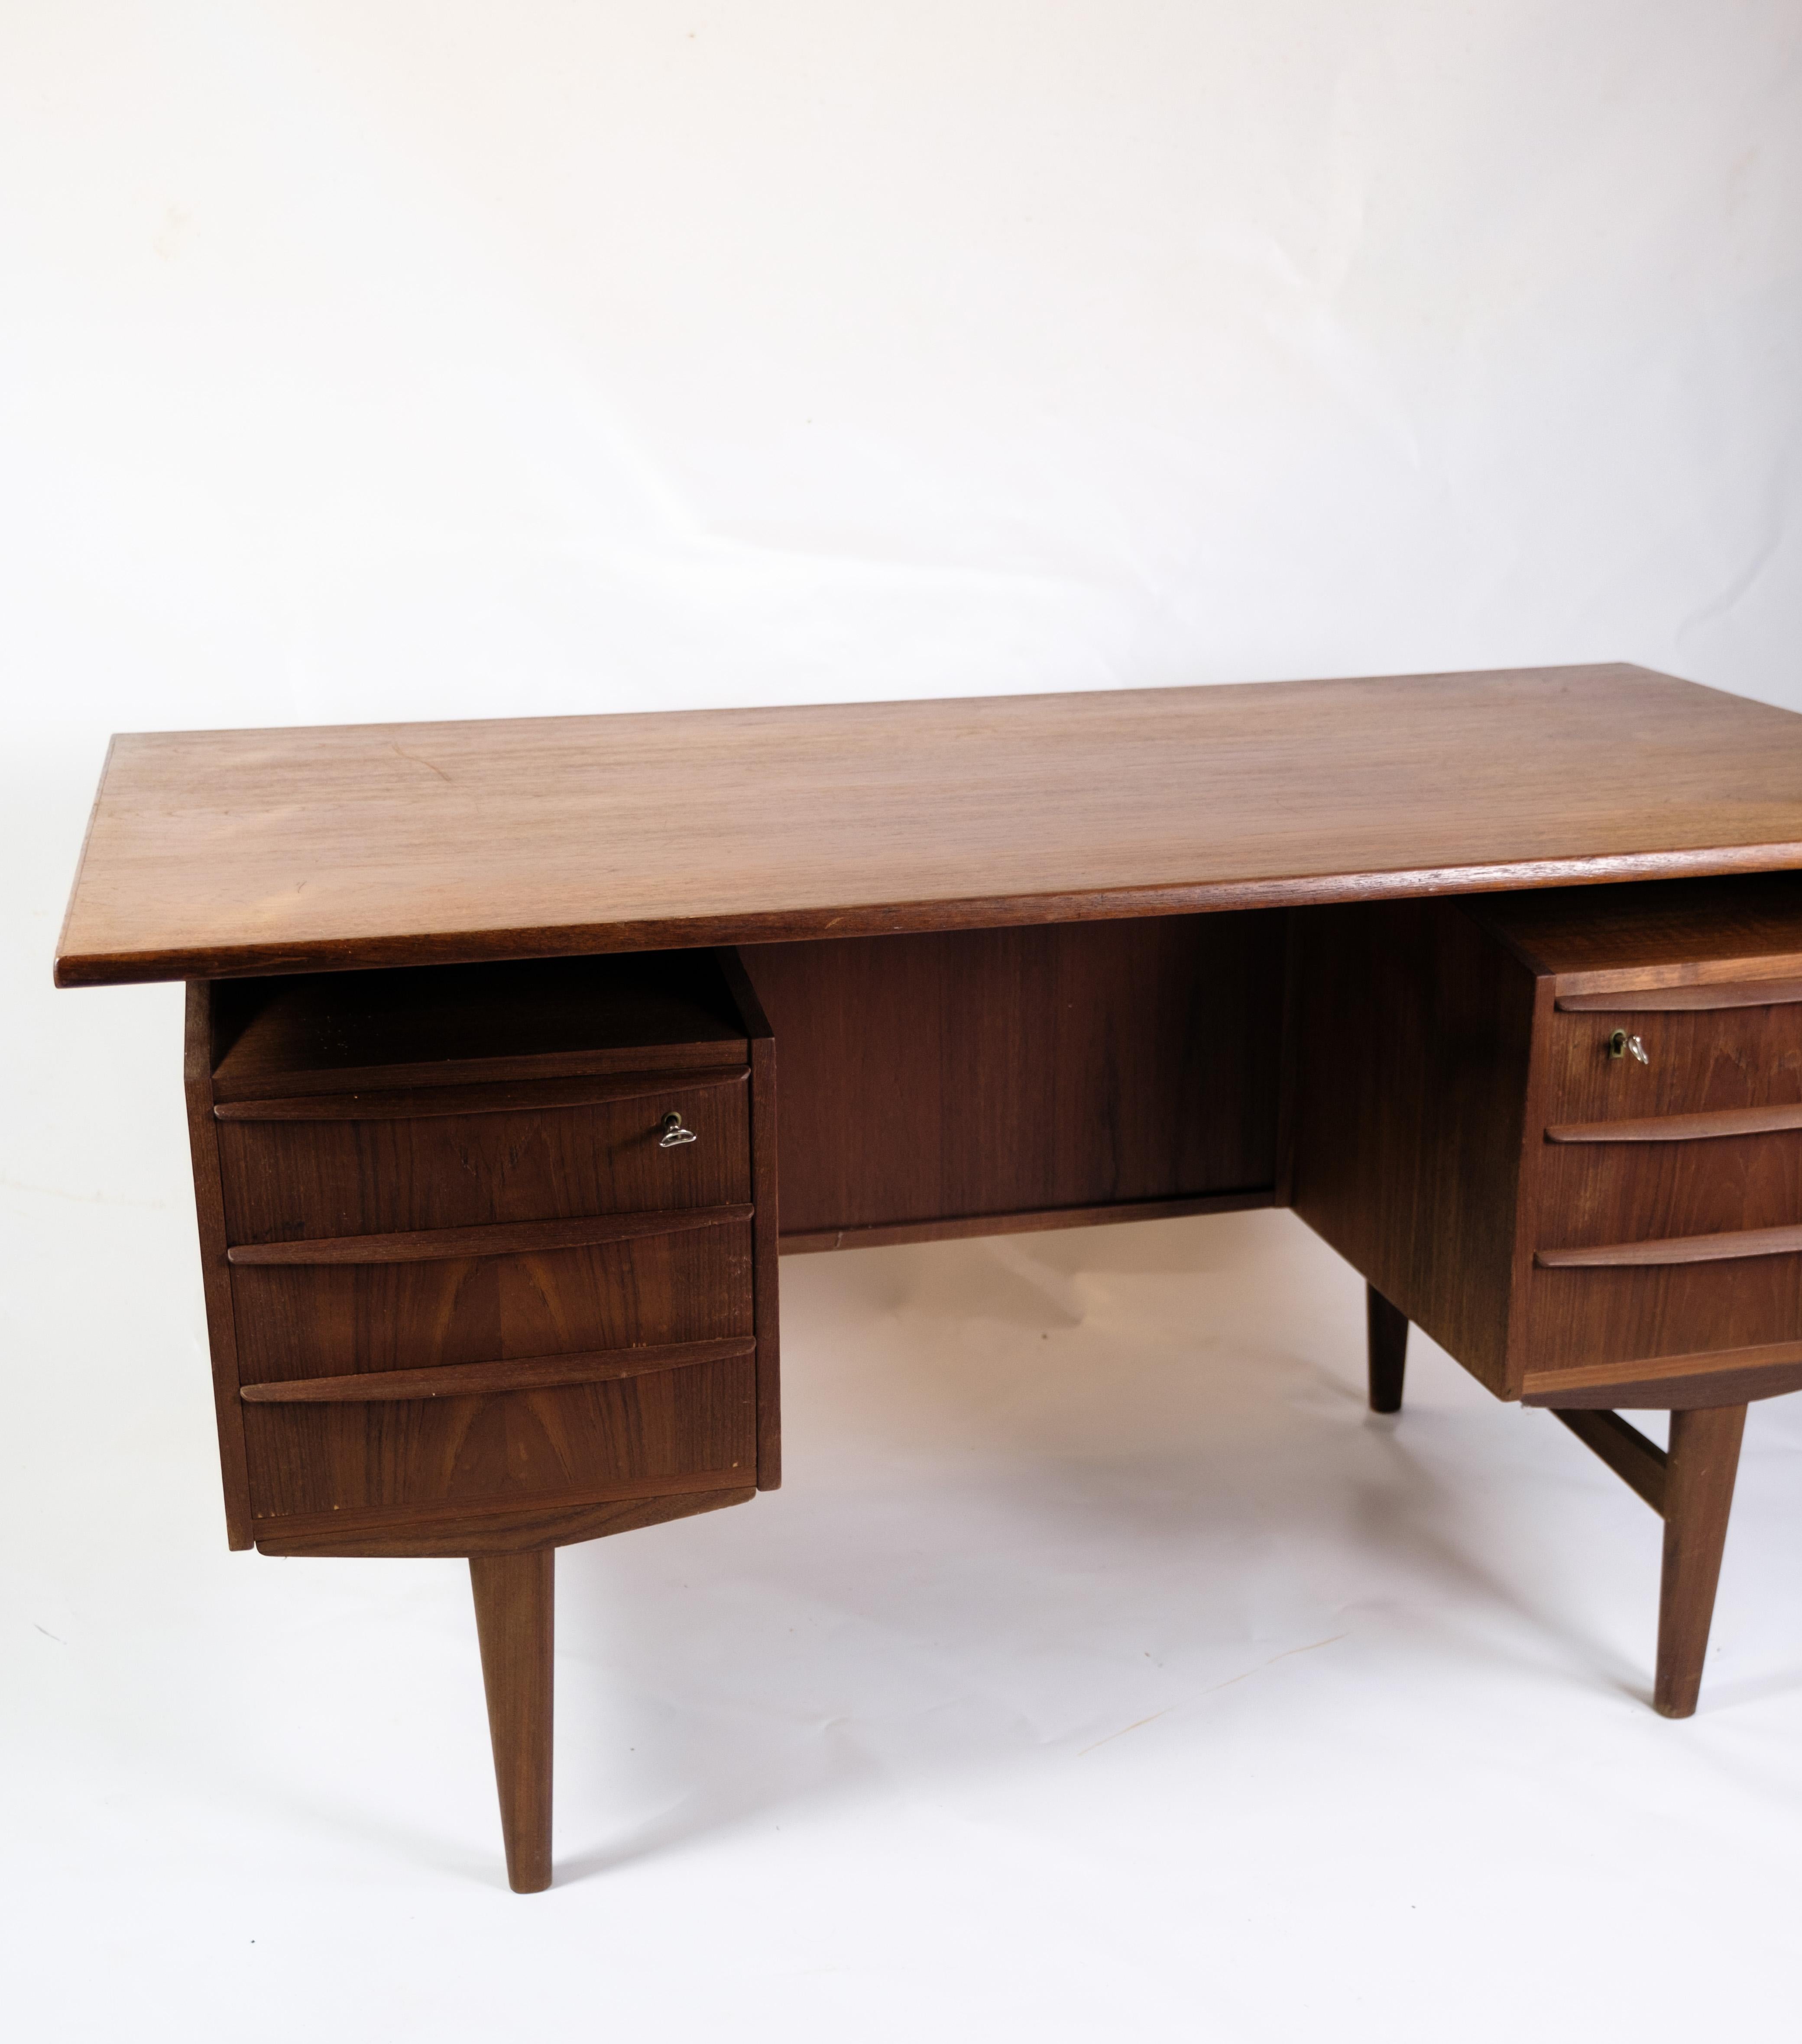 This desk is a nice example of Danish design from the 1960s, made of teak wood. One of the most notable features of this desk is the floating tabletop, which creates an airy and light visual aesthetic.

The carefully selected teak wood construction